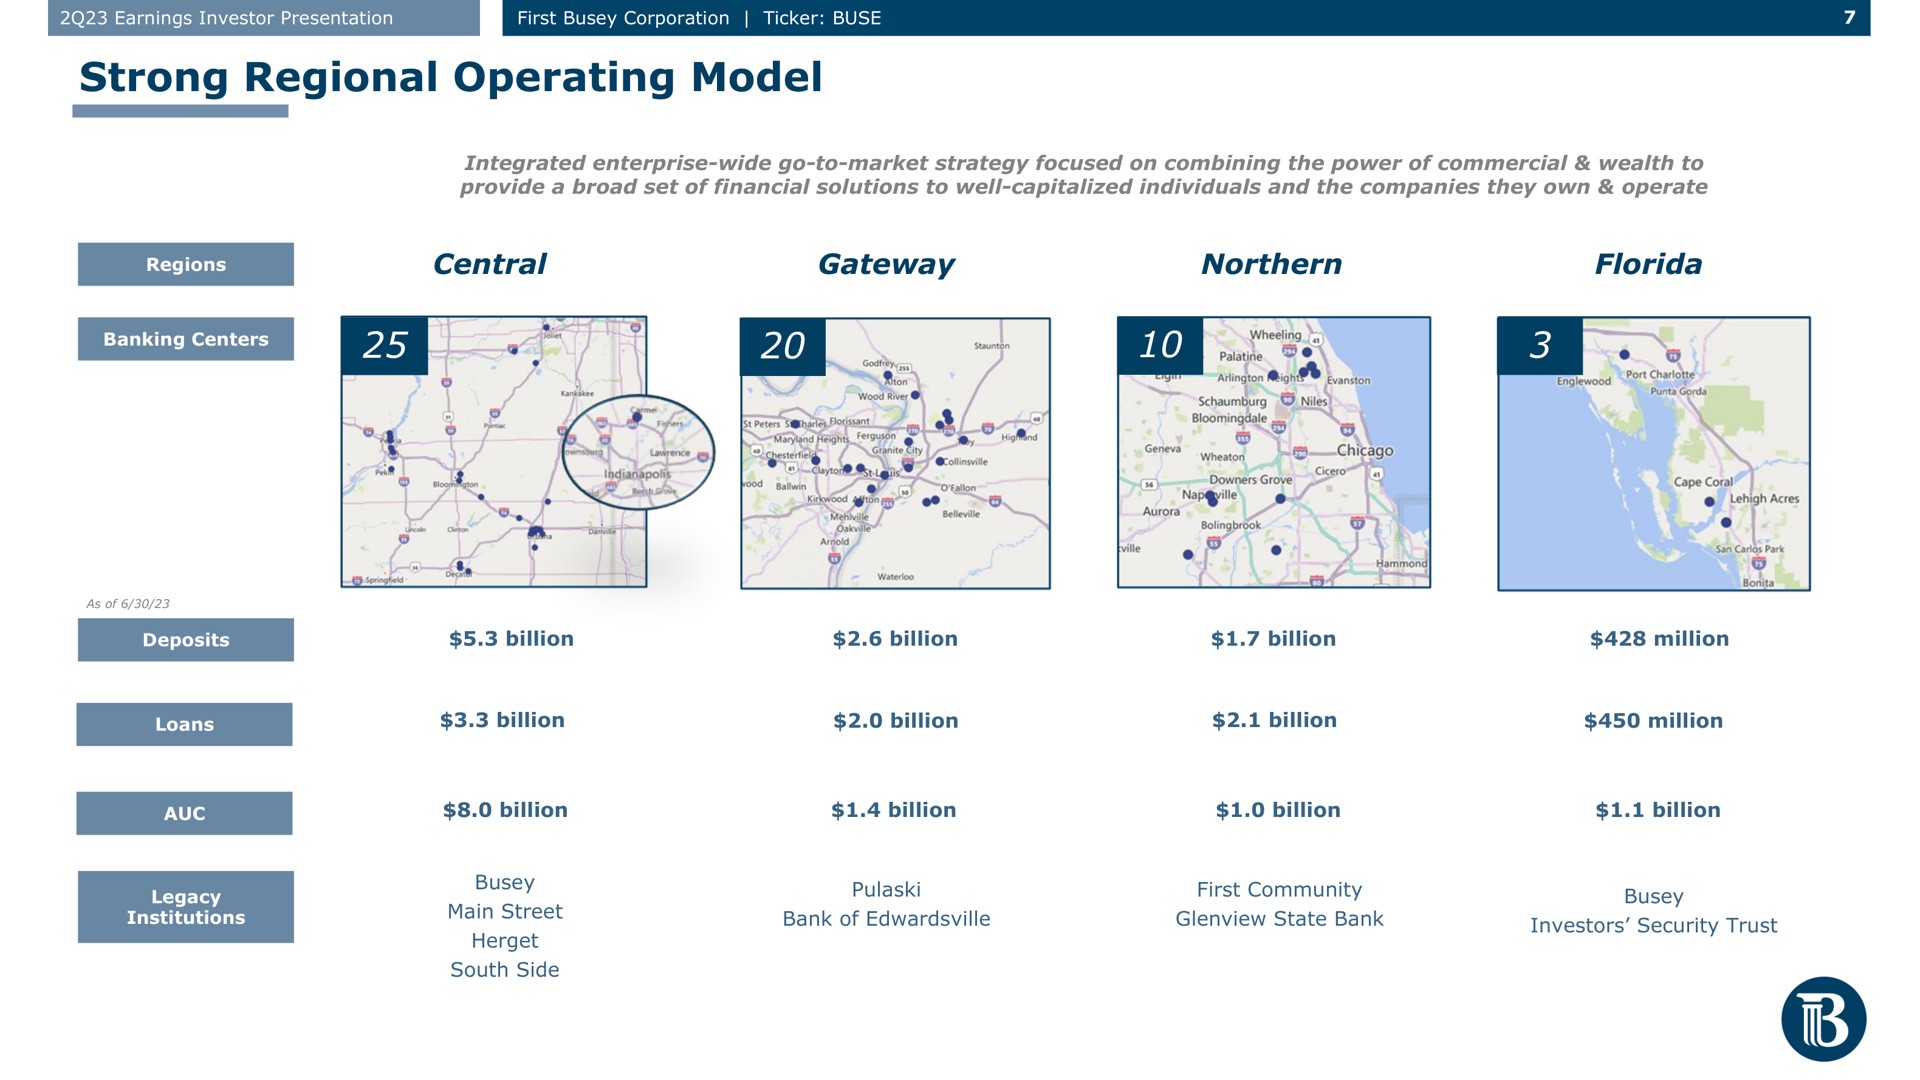 strong regional operating model central gateway northern billion billion billion billion i billion billion billion | First Busey